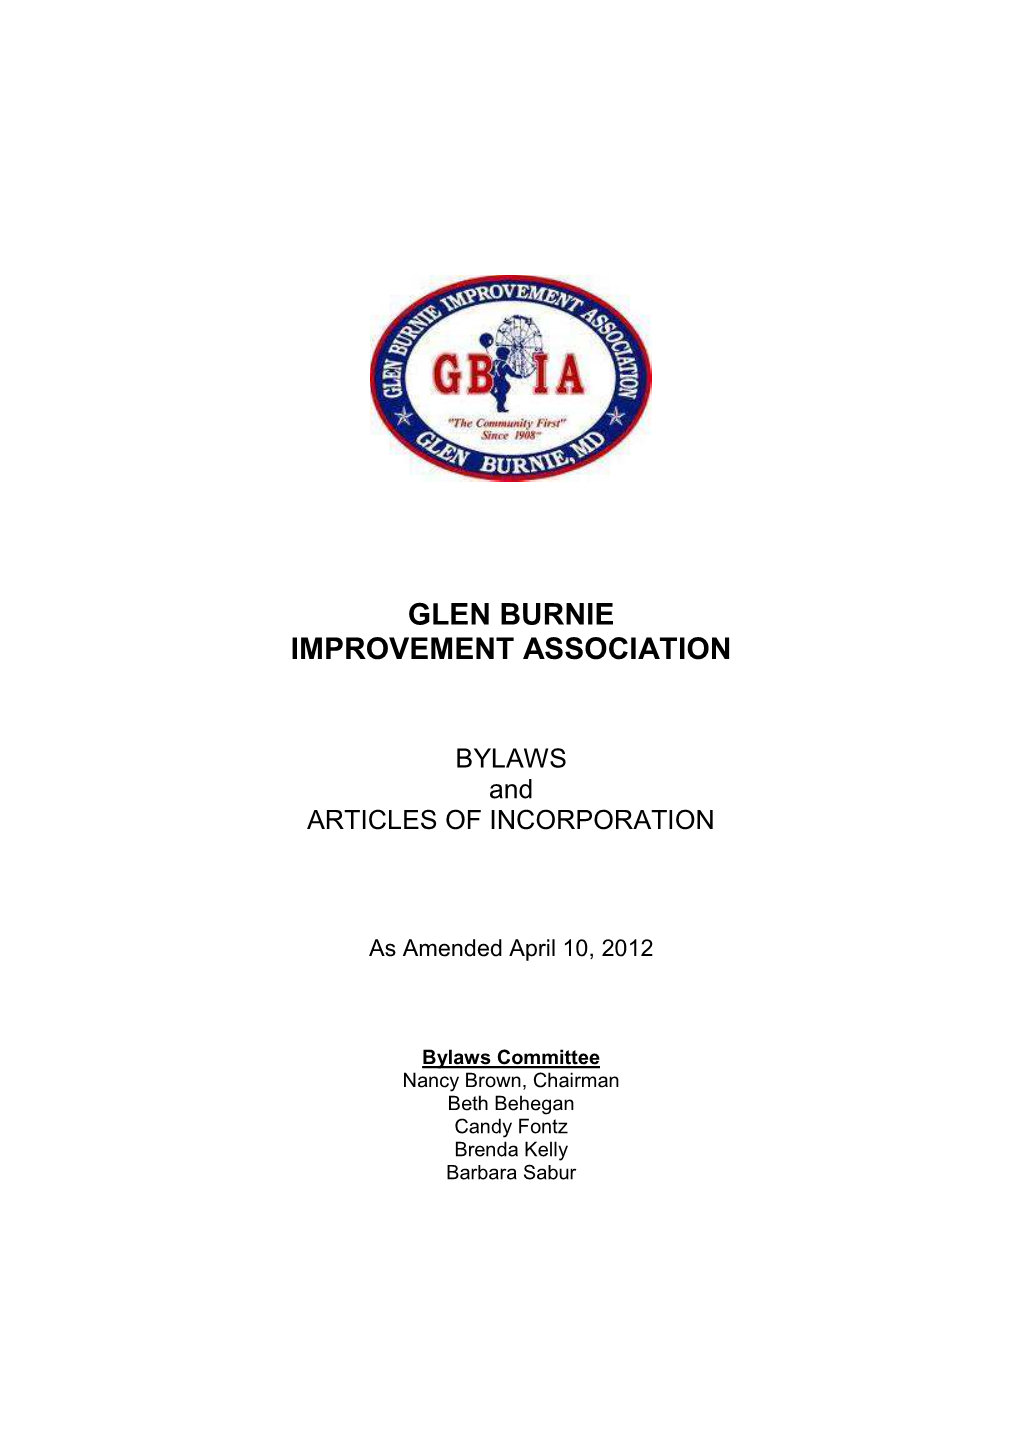 BYLAWS and ARTICLES of INCORPORATION